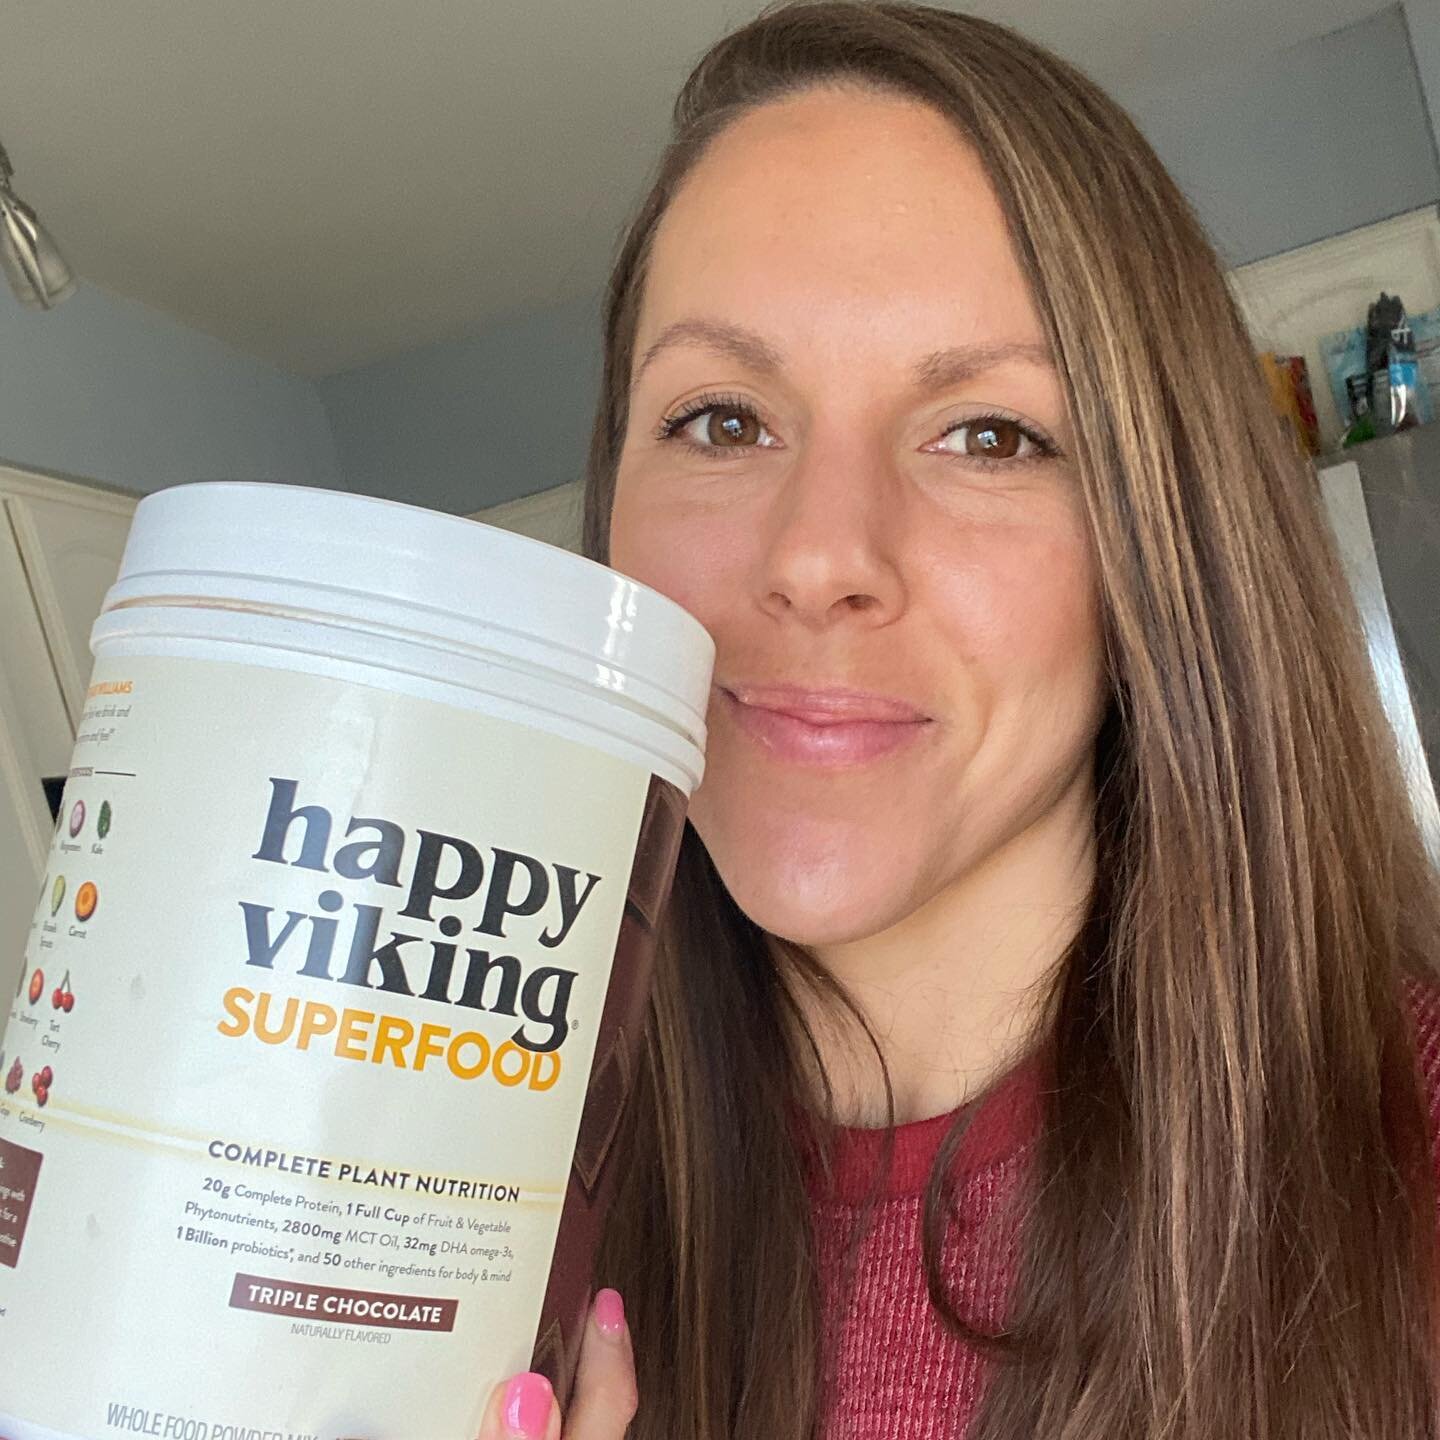 Attention all you busy people! As a busy boy mom who spends her days chasing around a toddler, I don't always have the time to sit down for a full blown meal during the day. Which is why having high quality supplements (that actually taste good) on h